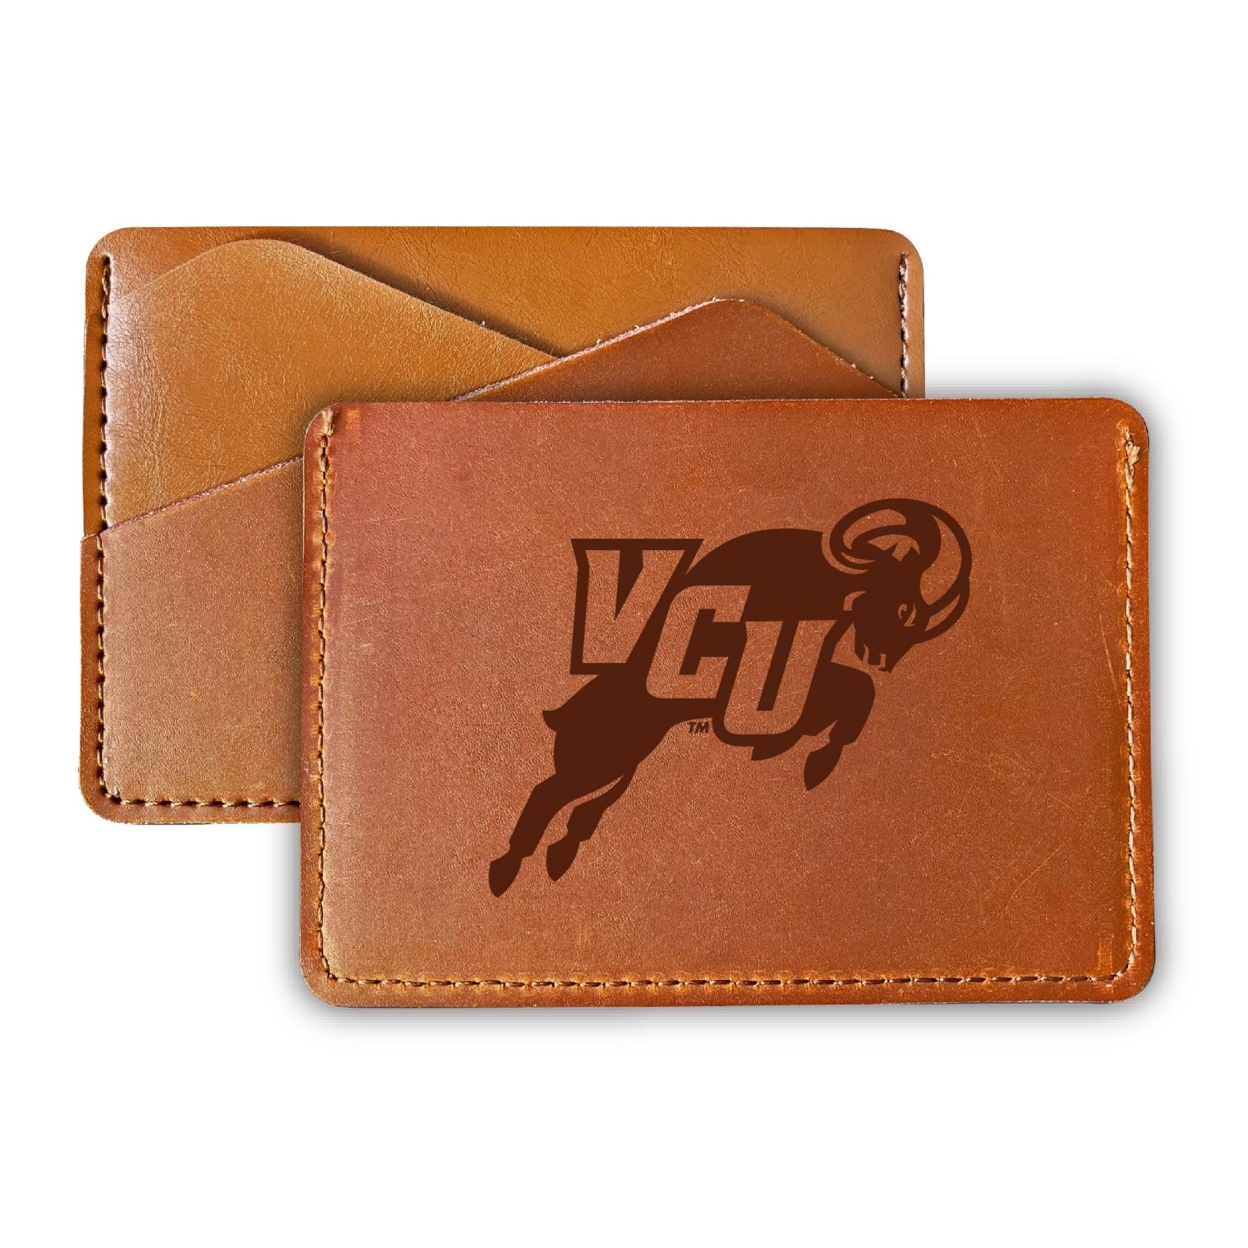 Virginia Commonwealth College Leather Card Holder Wallet